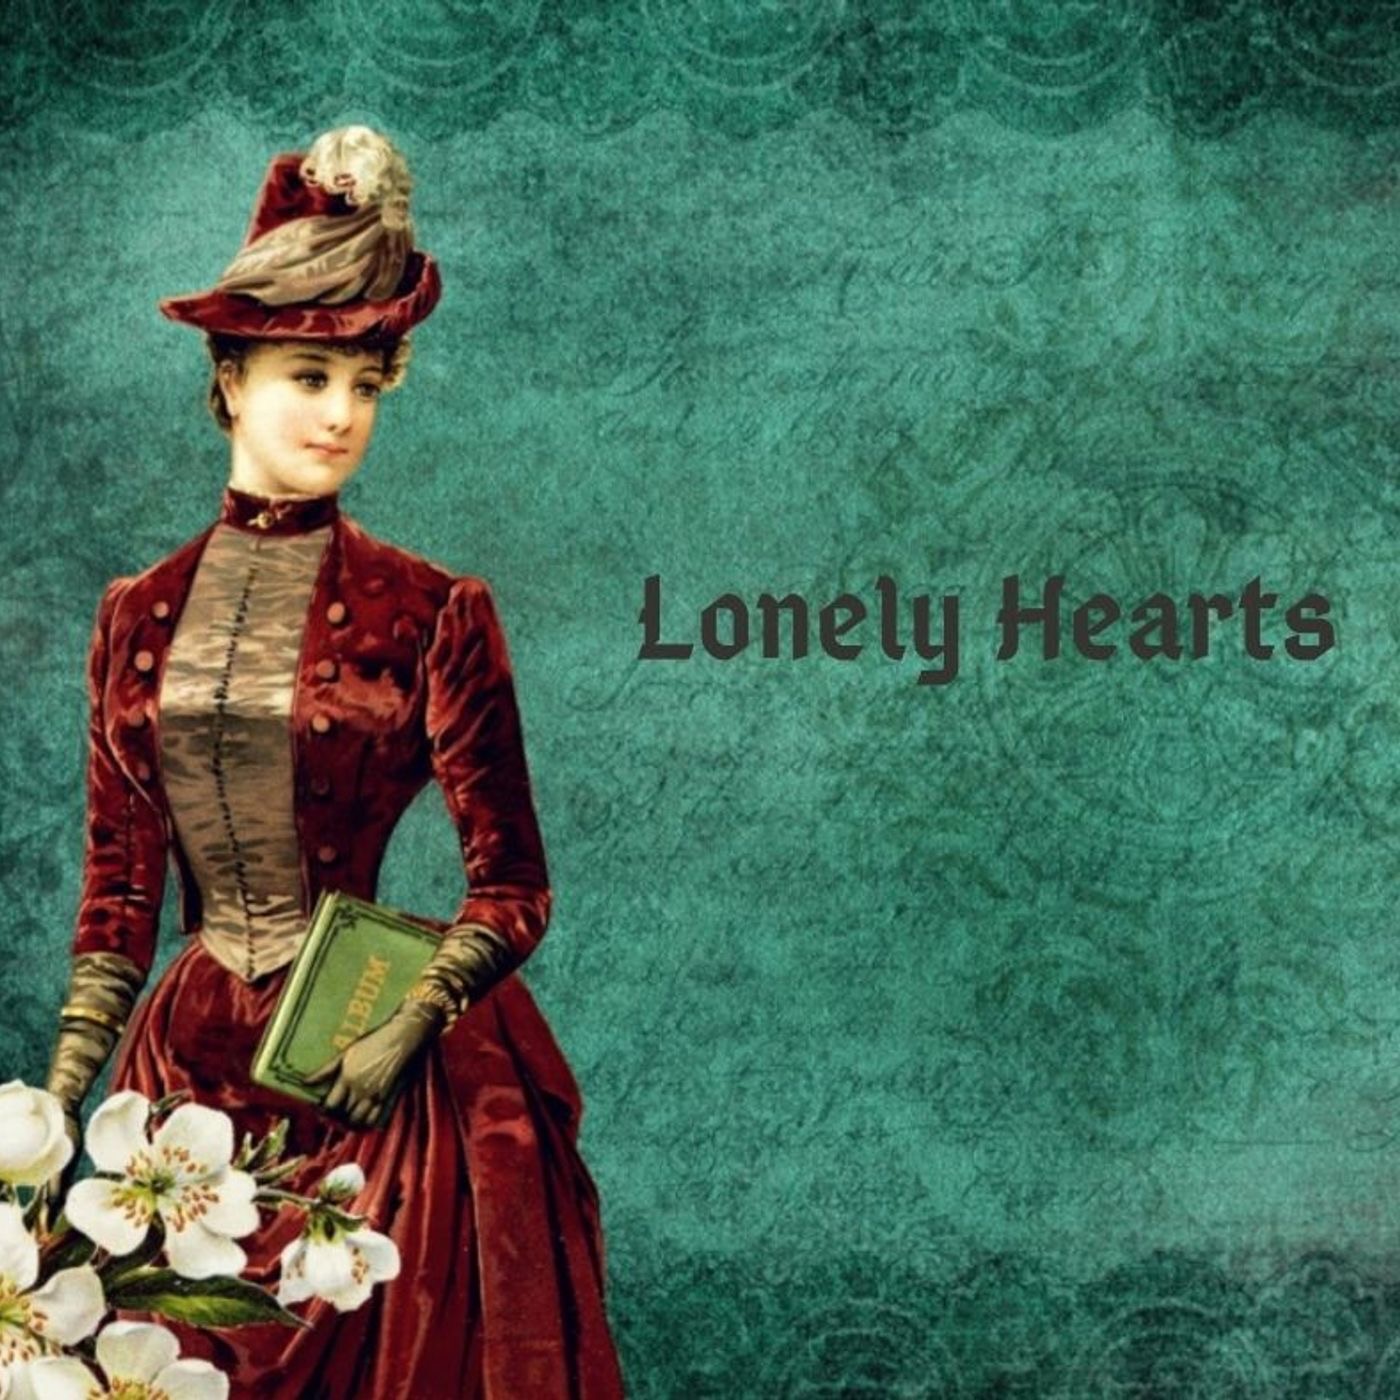 S5 Ep4: Lonely Hearts